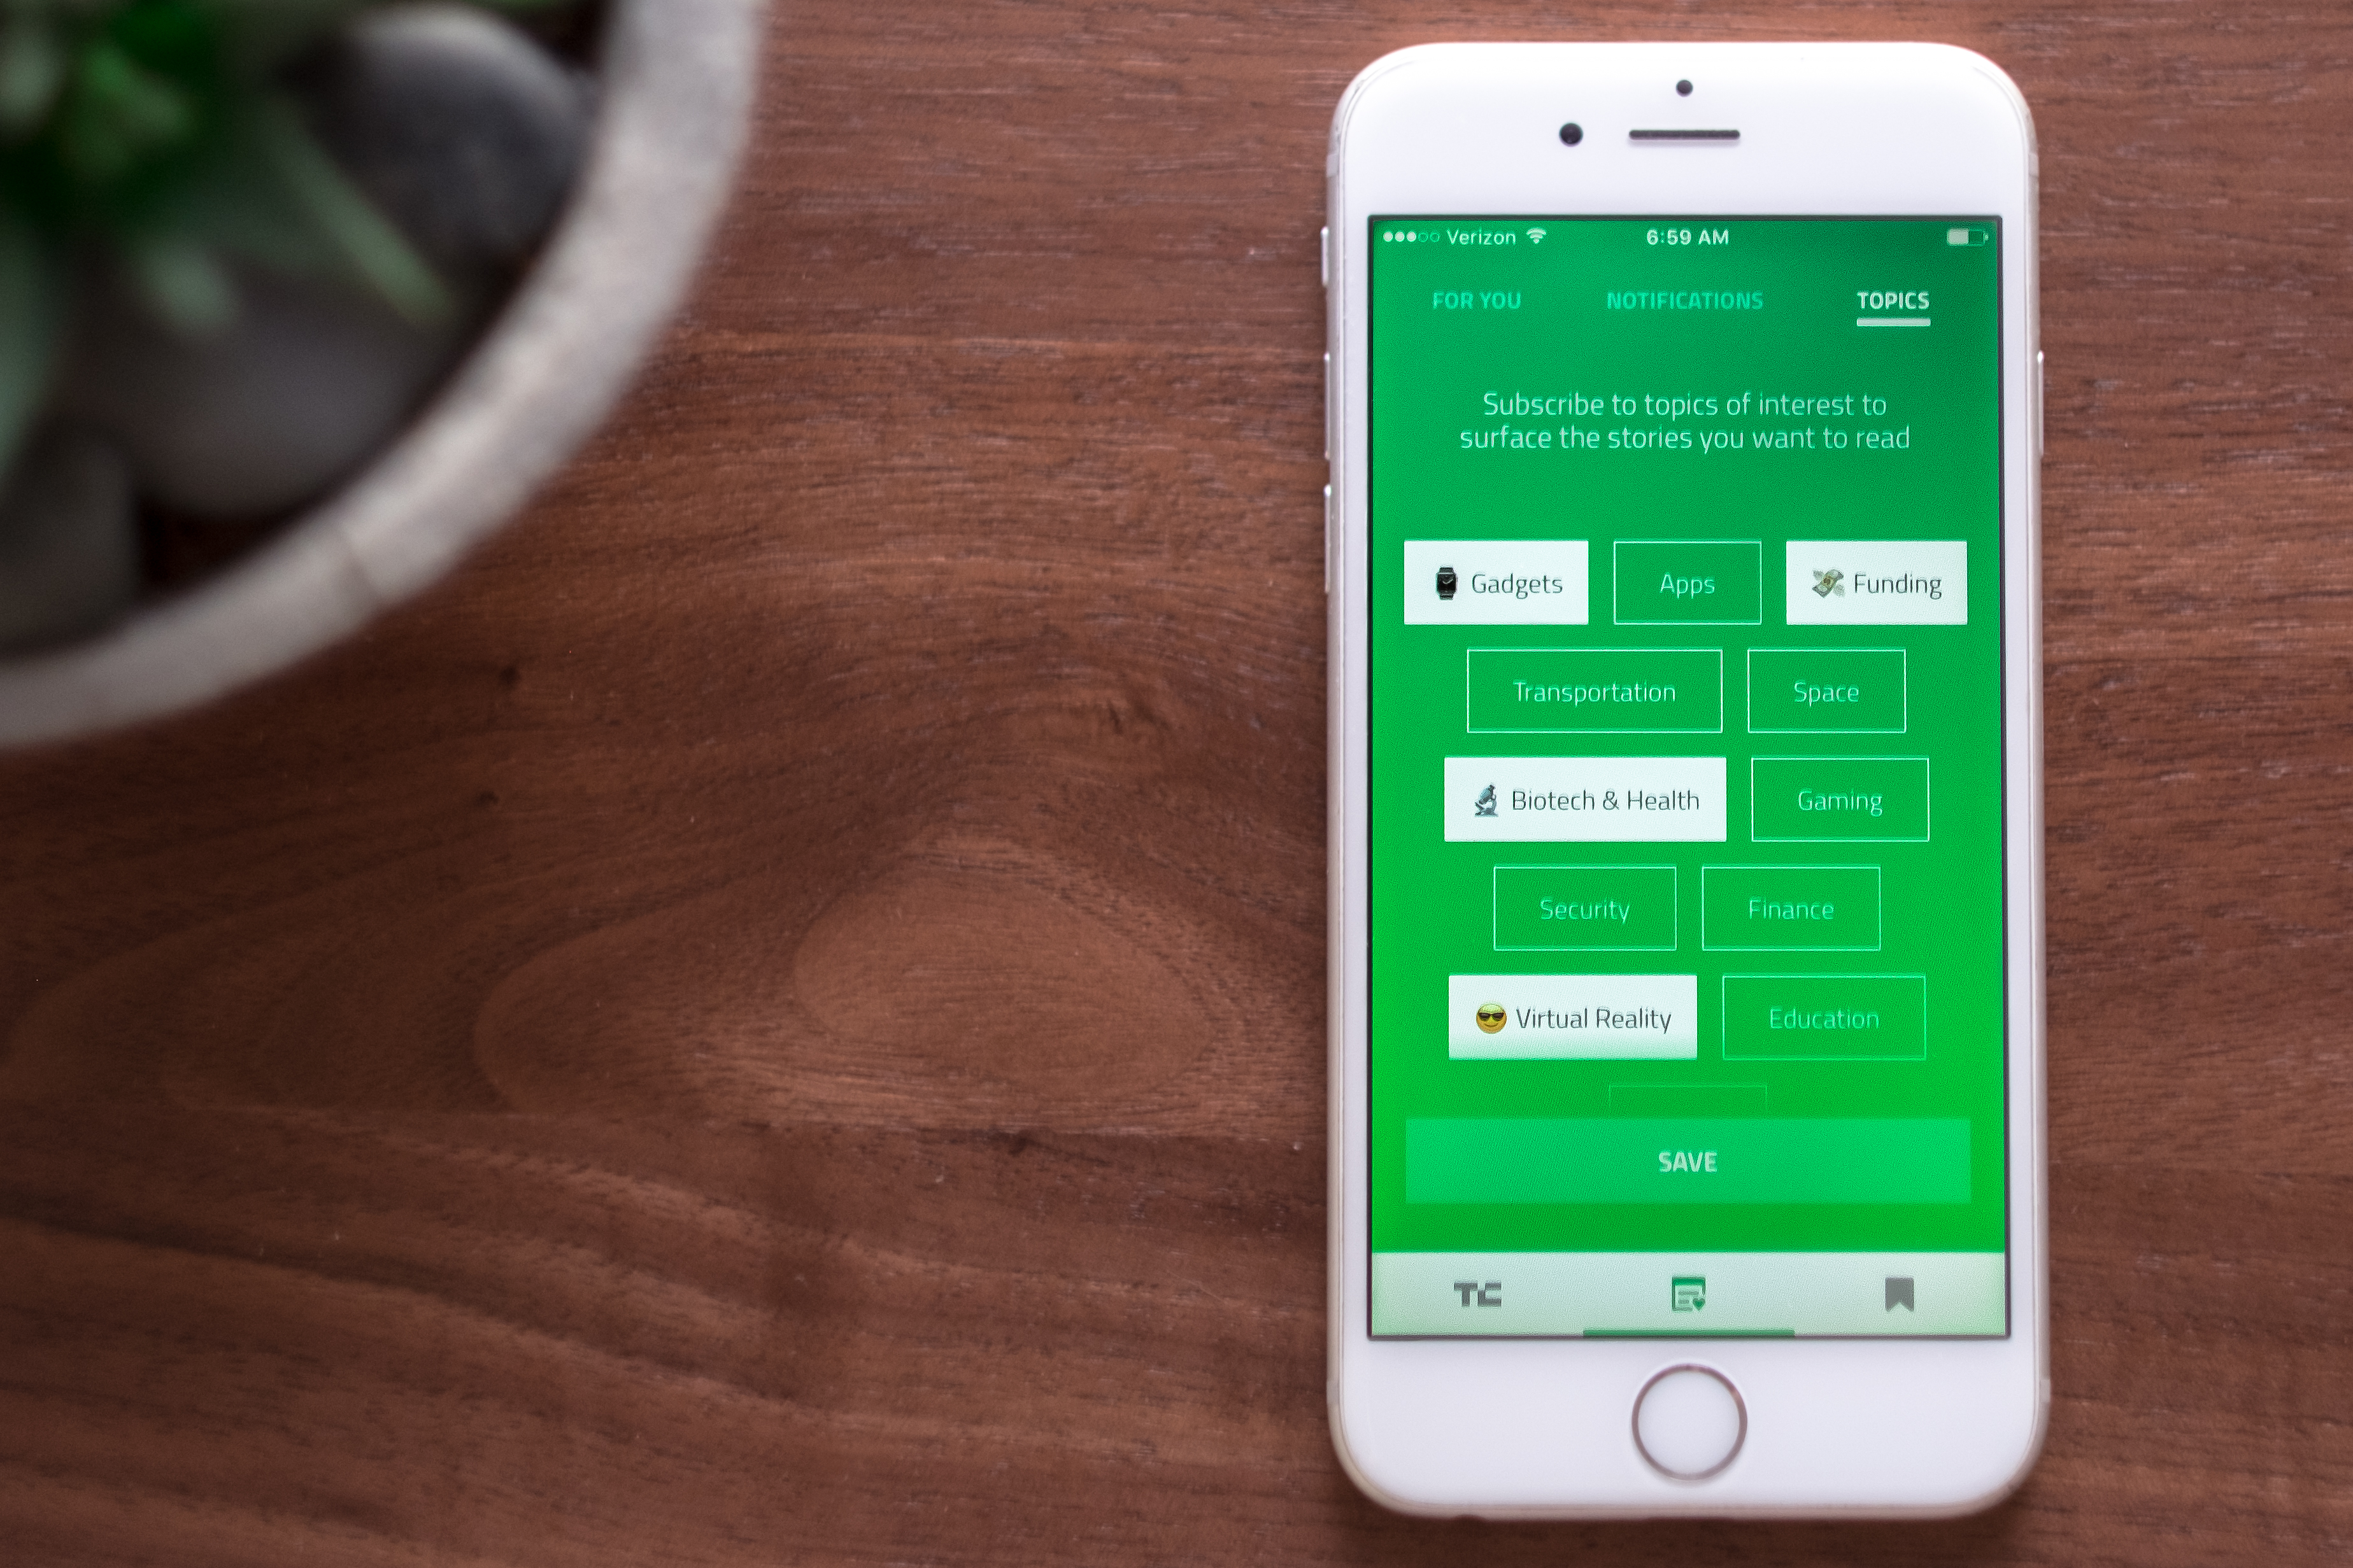 Download the new, completely redesigned TechCrunch mobile app